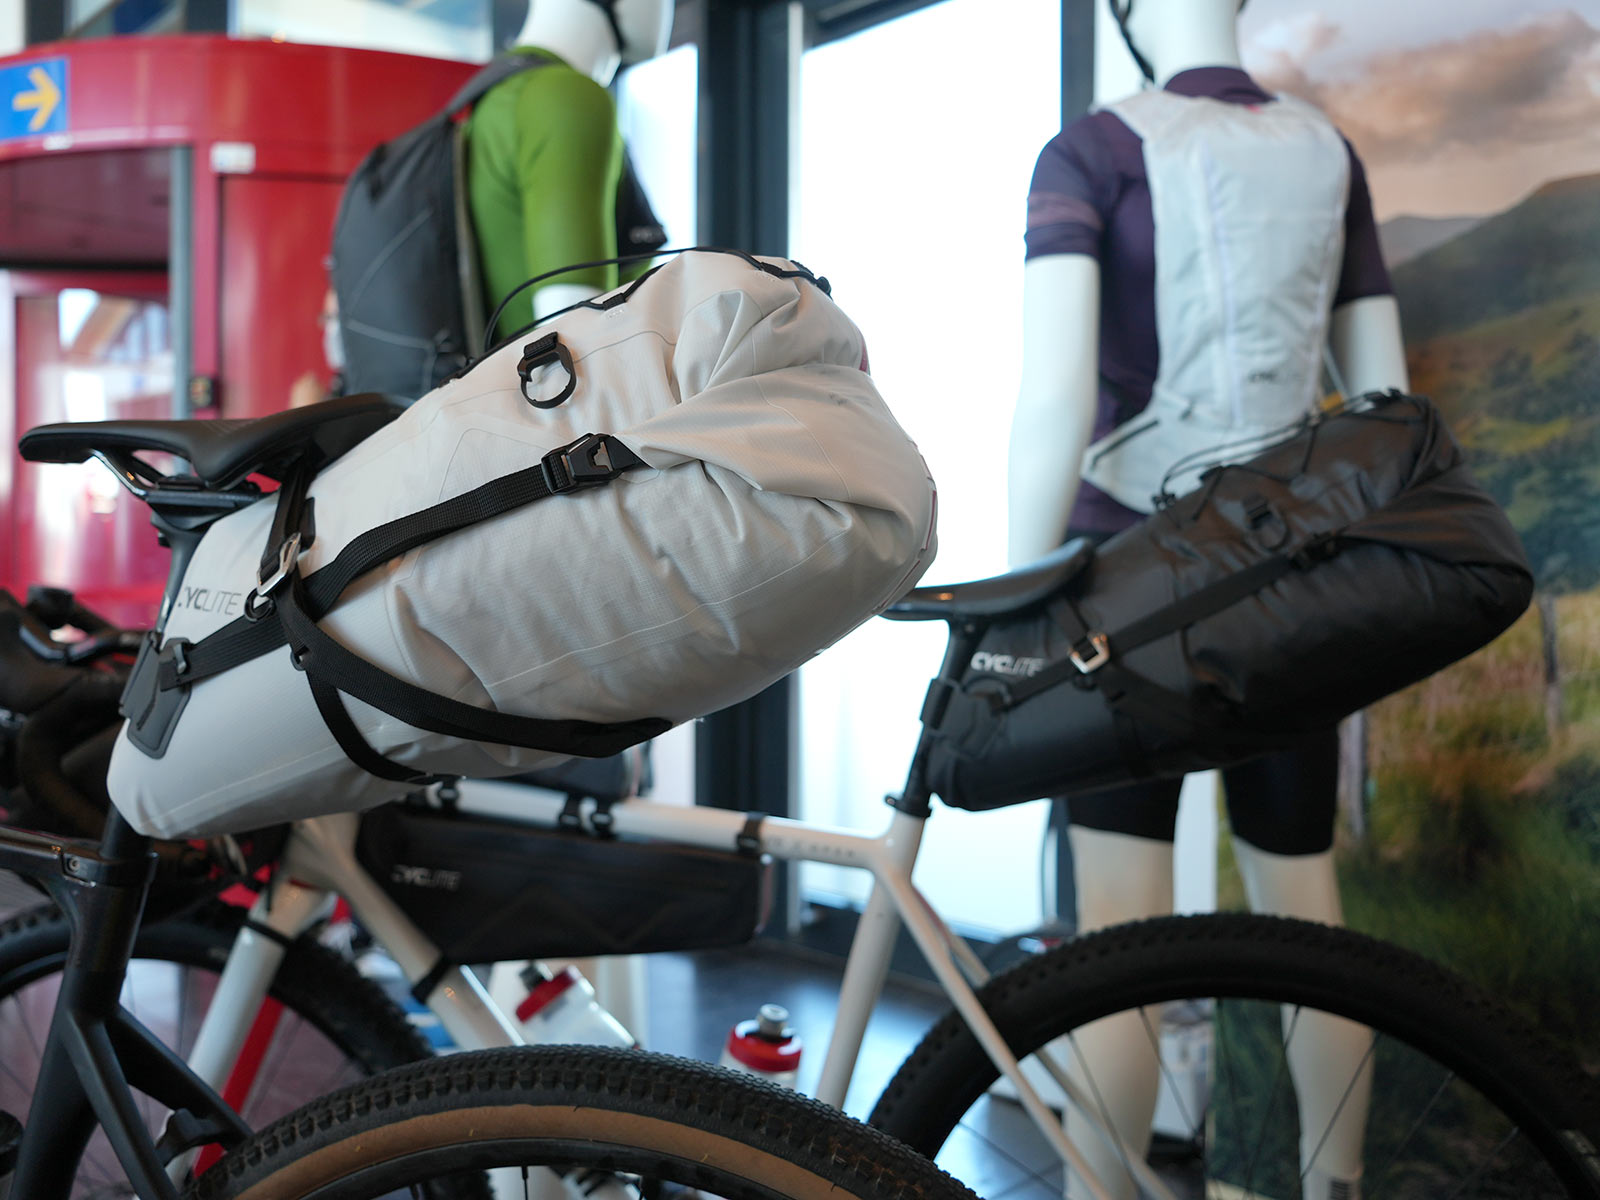 cyclite ultralight frame bags for bikepacking shown on a gravel touring bicycle